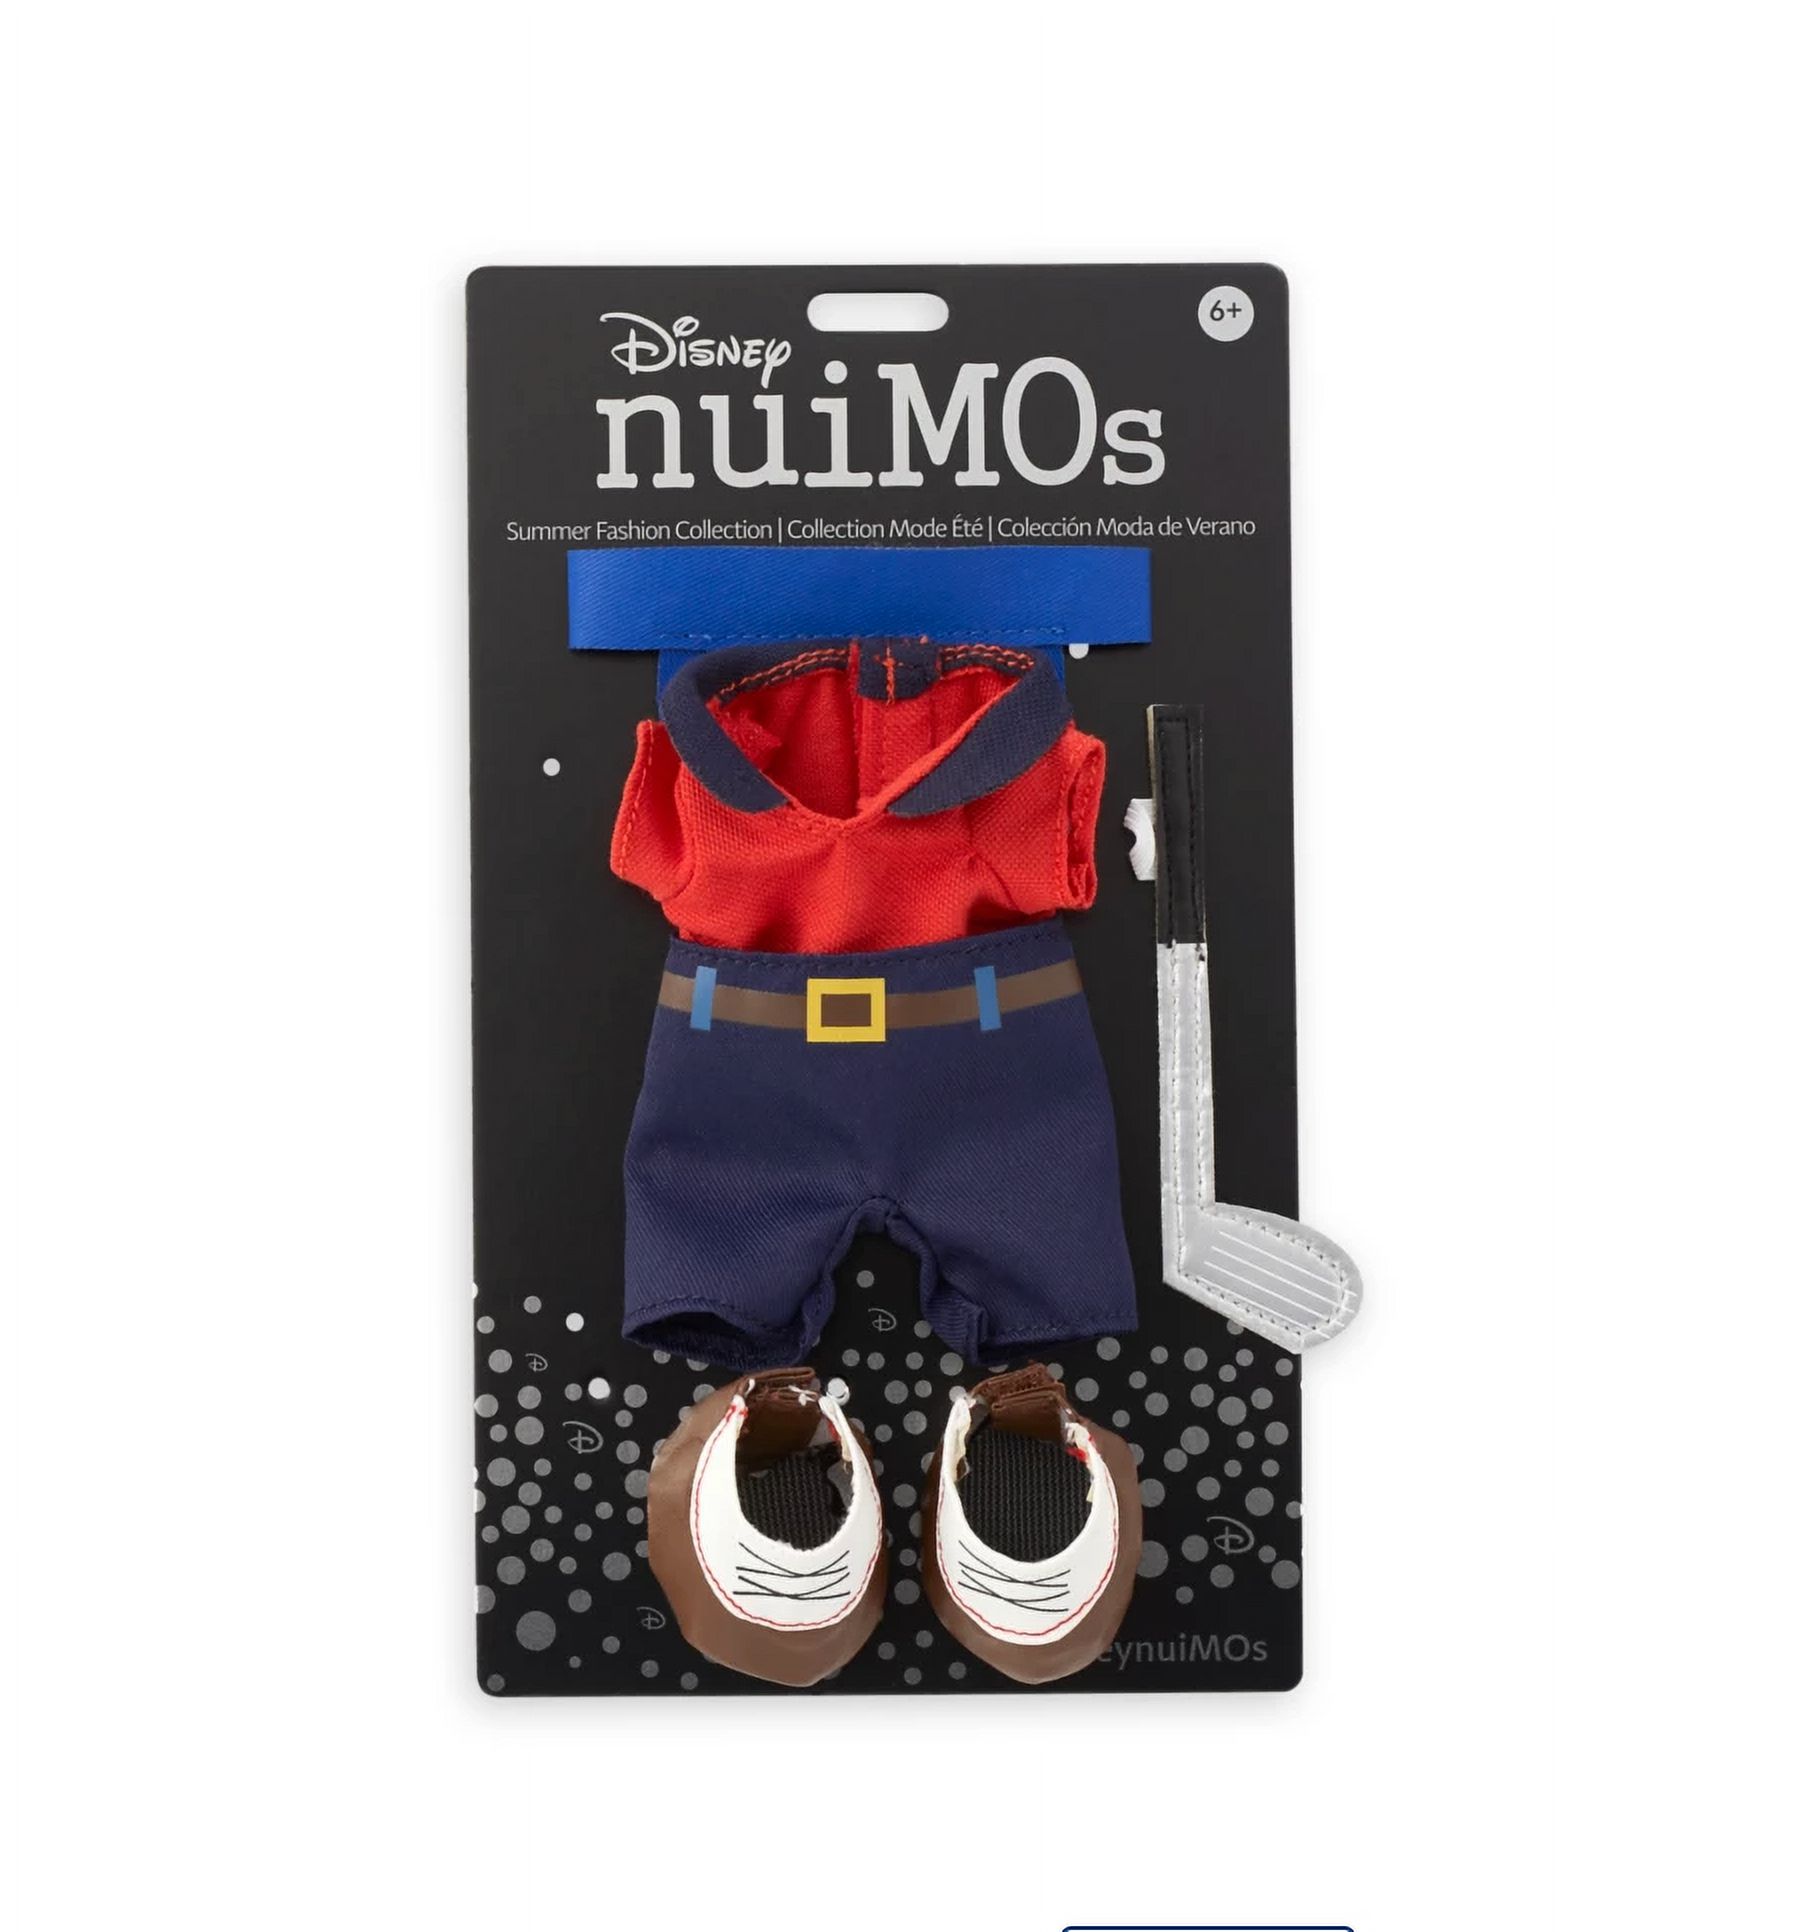 Disney NuiMOs Golf Outfit with Pants New with Card - image 3 of 3